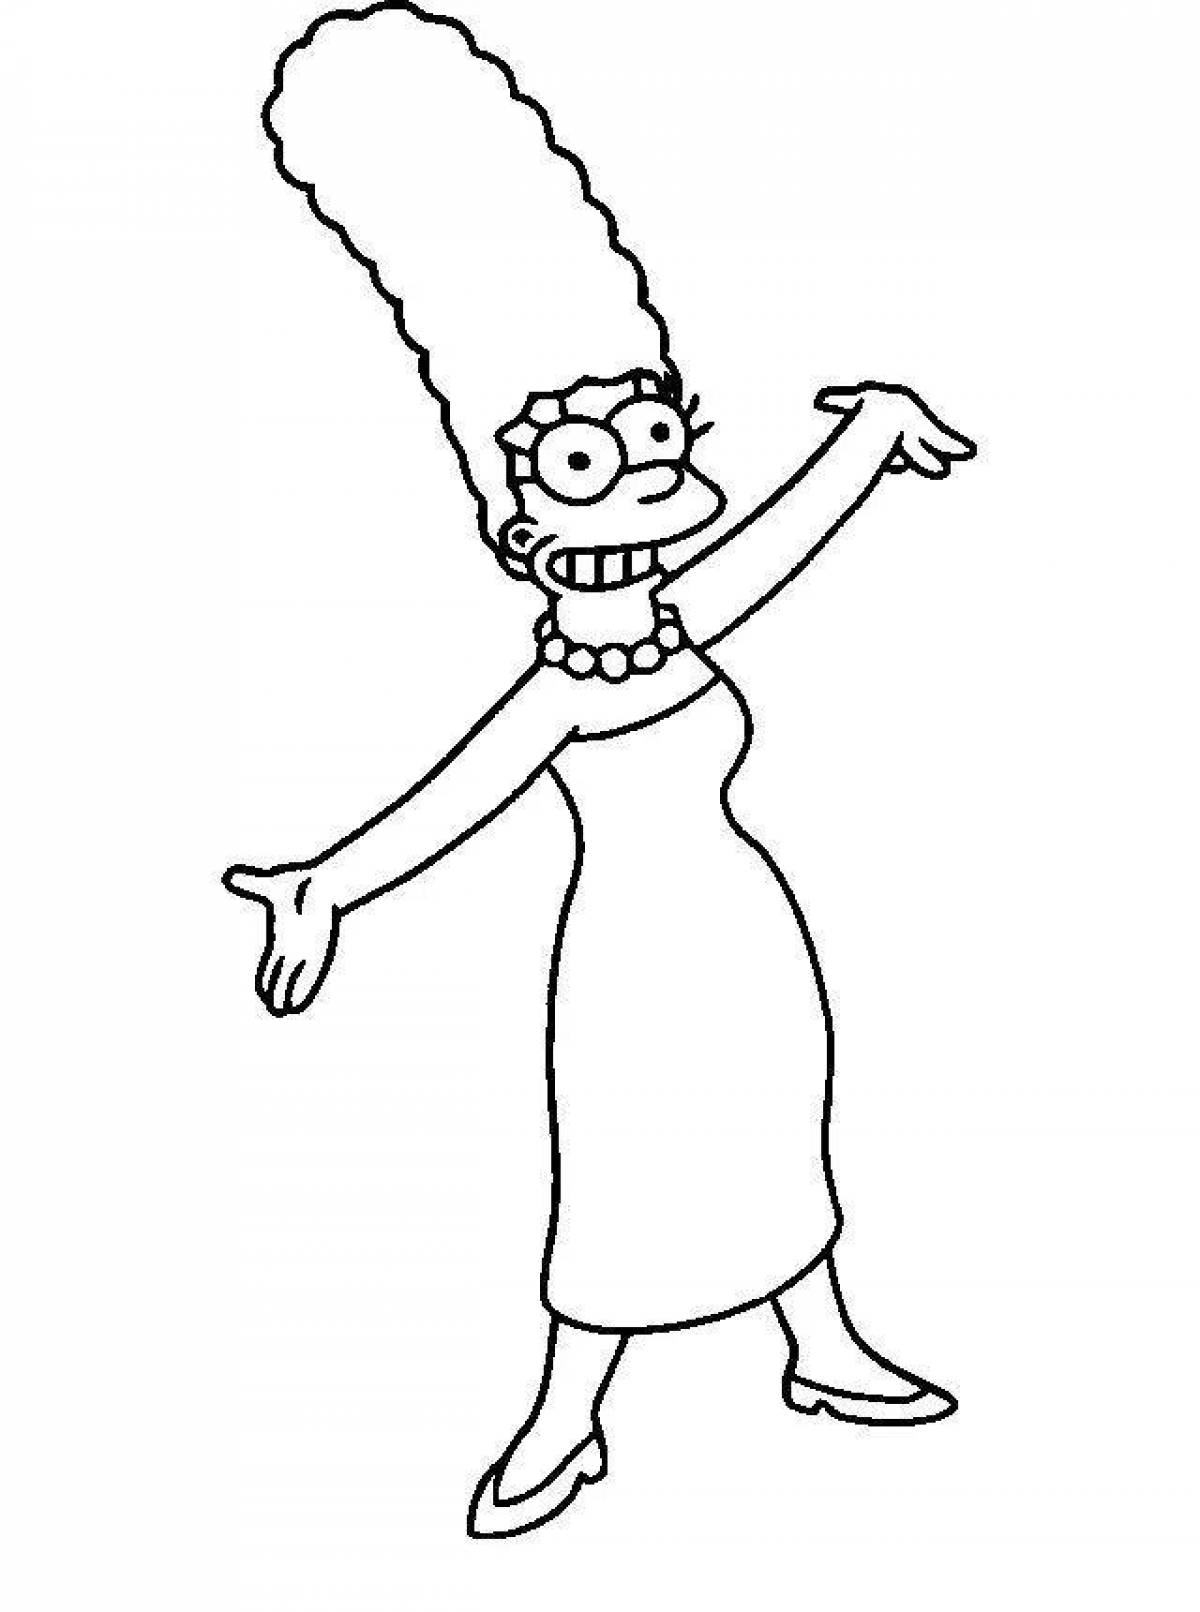 Marge simpson live coloring page